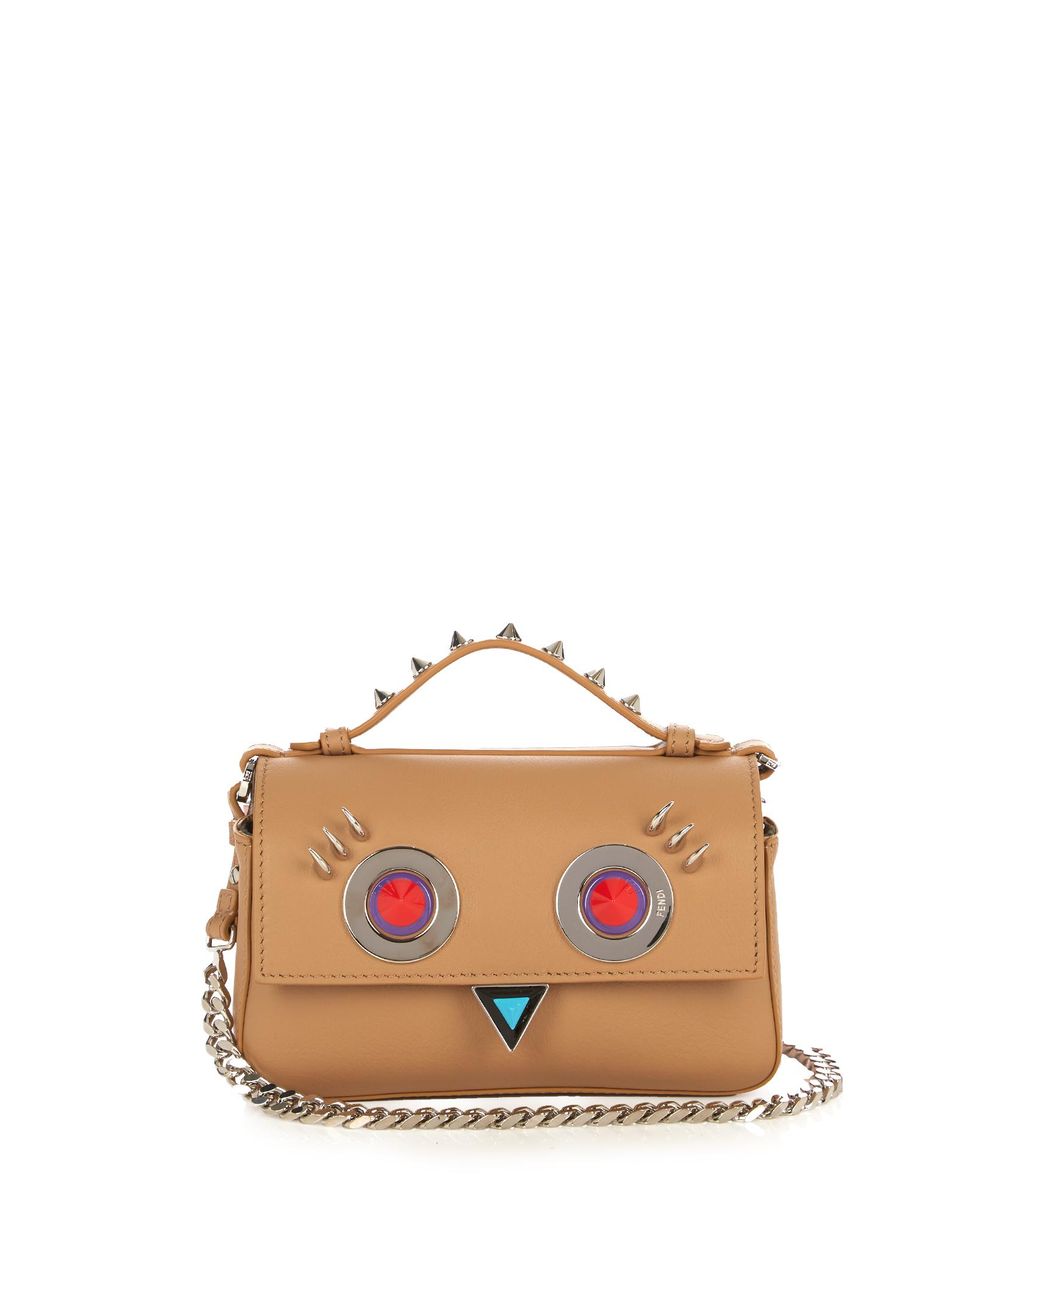 The story of Silvia Venturini Fendi's Peekaboo bag: from tongue-in-cheek  accessory to timeless design icon